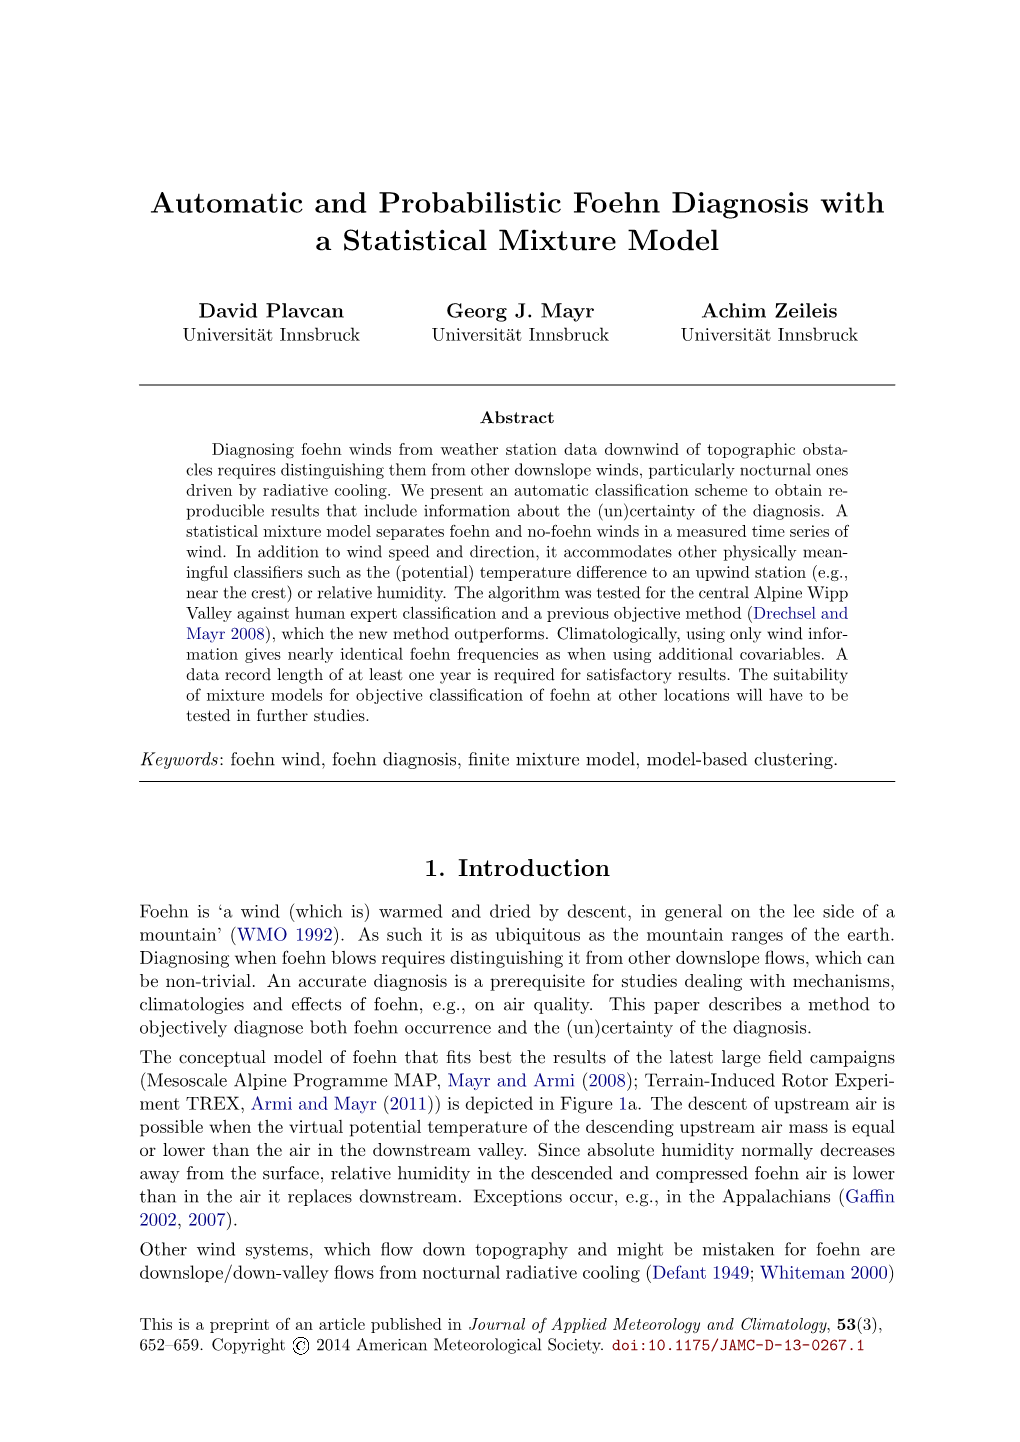 Automatic and Probabilistic Foehn Diagnosis with a Statistical Mixture Model